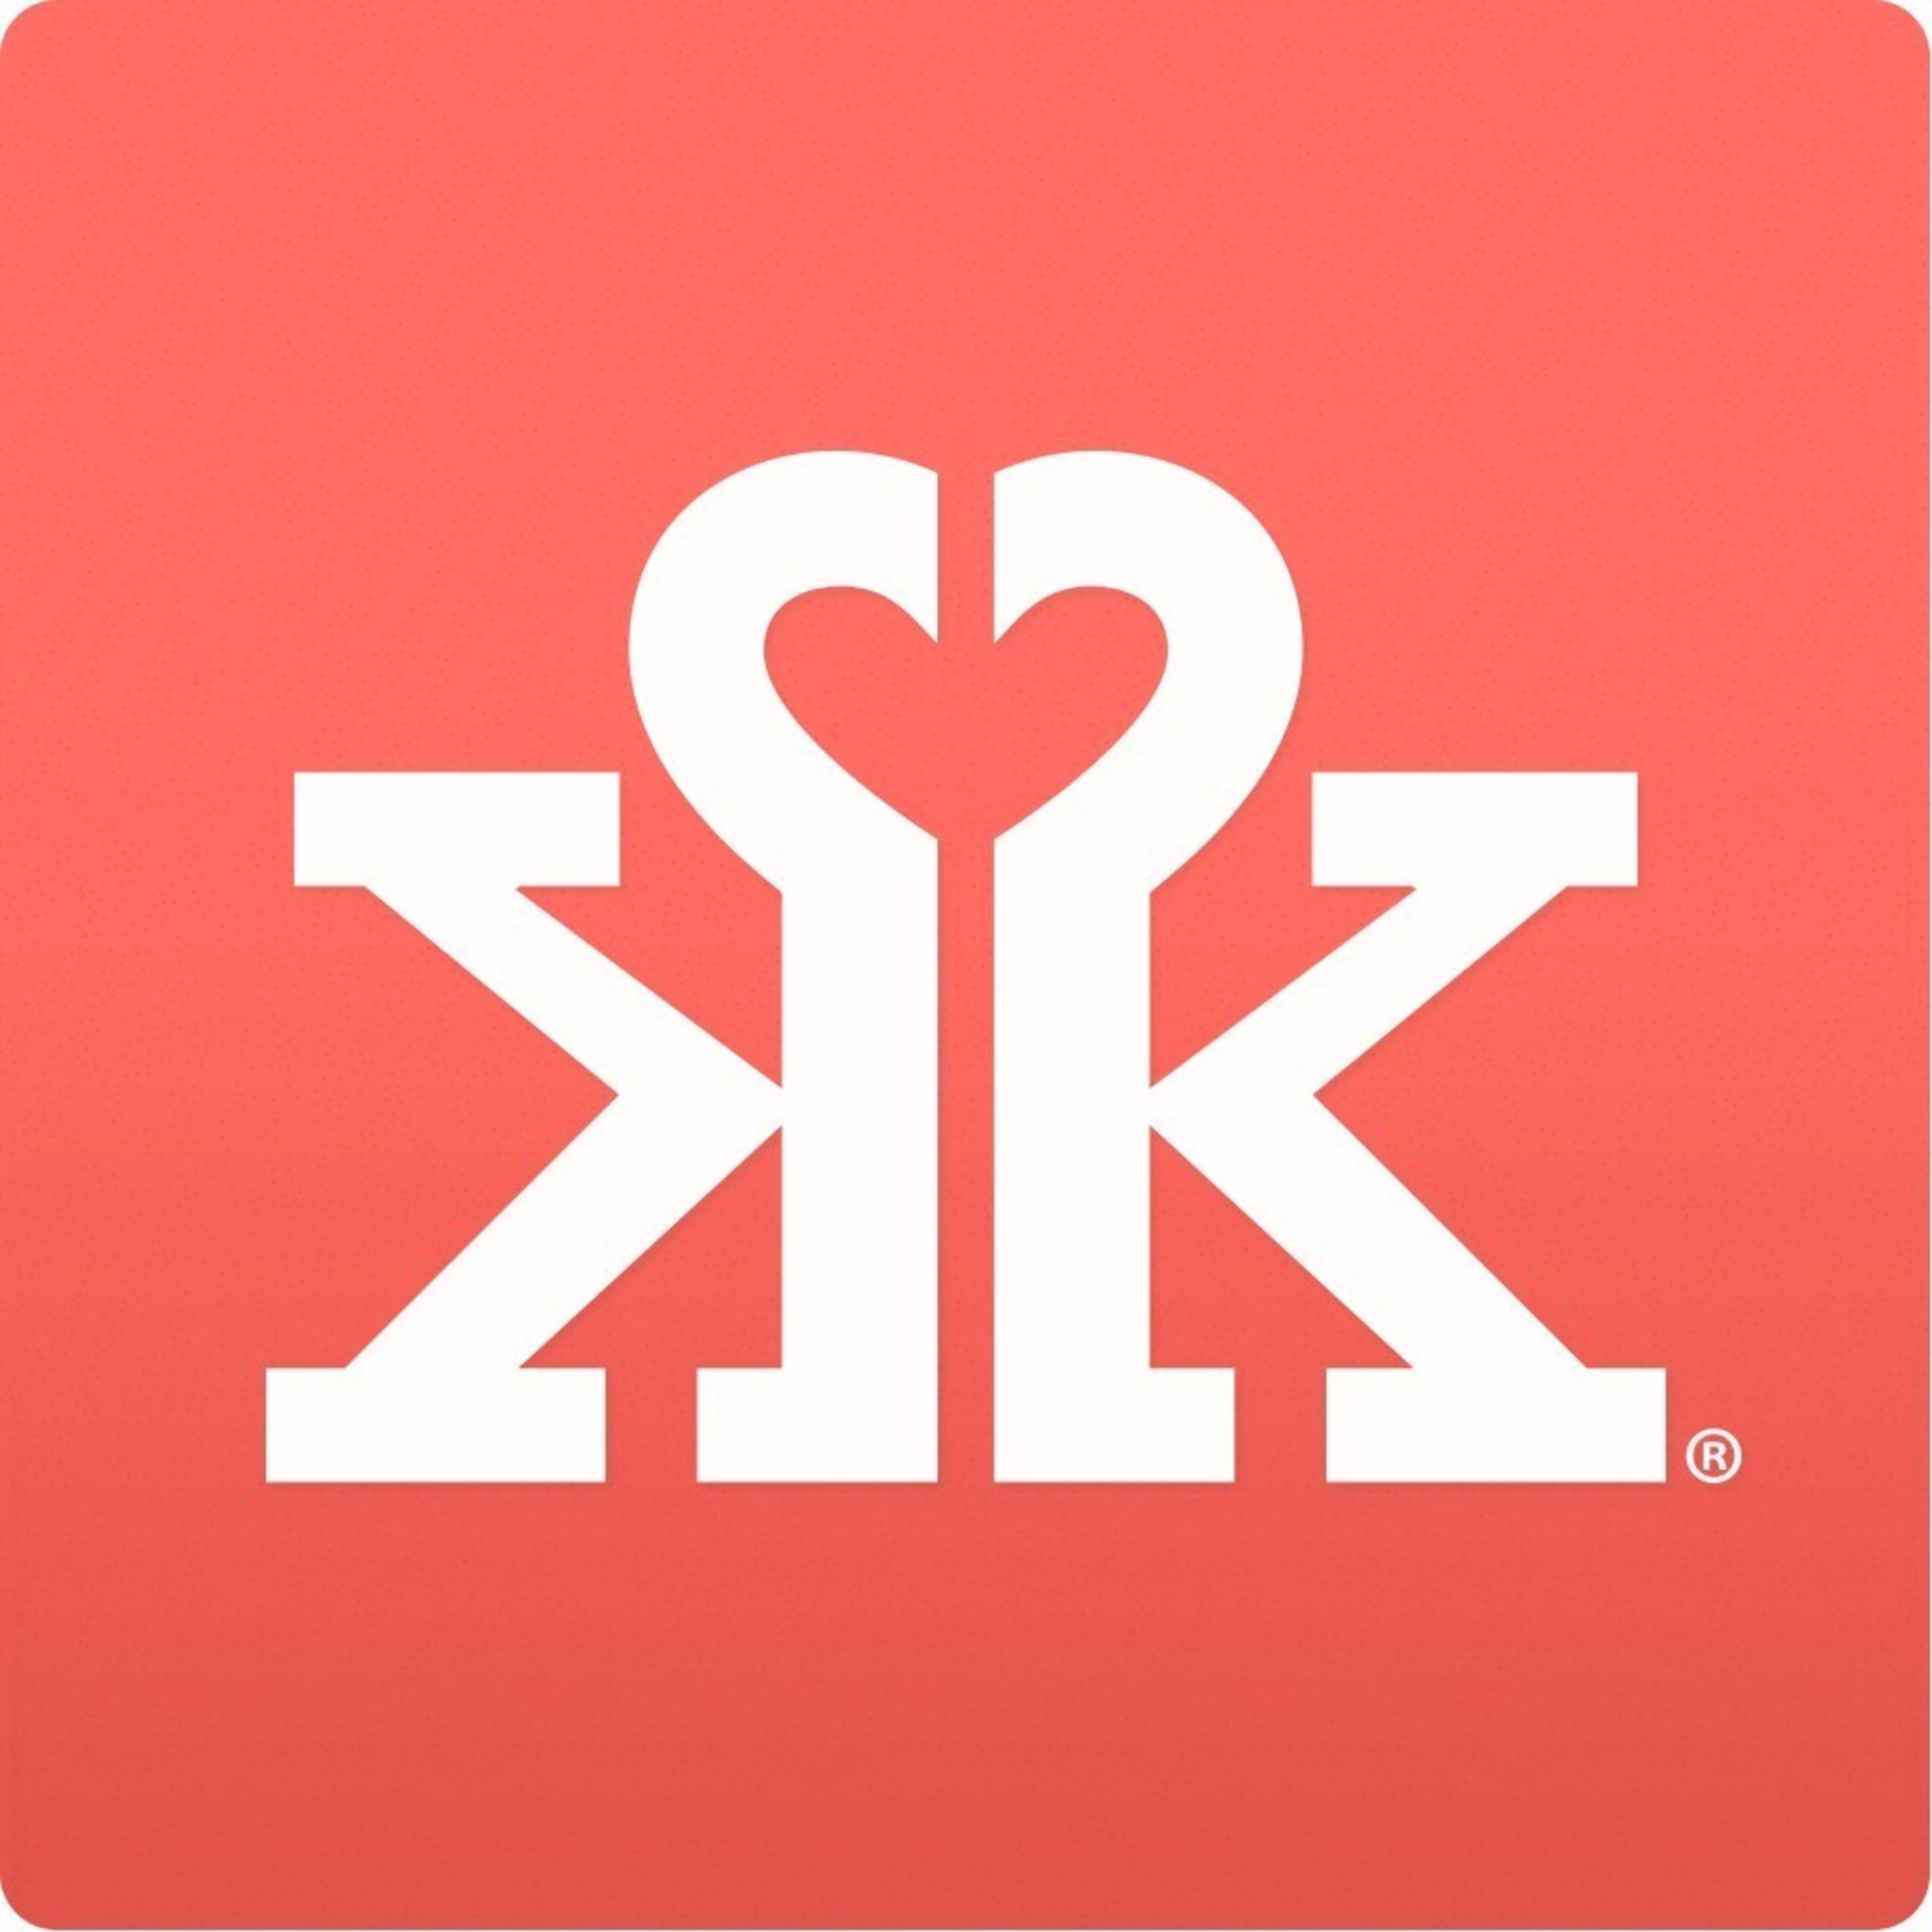 Grokker, the "Be A Better You" online video network, today launched their first mobile app for iOS.